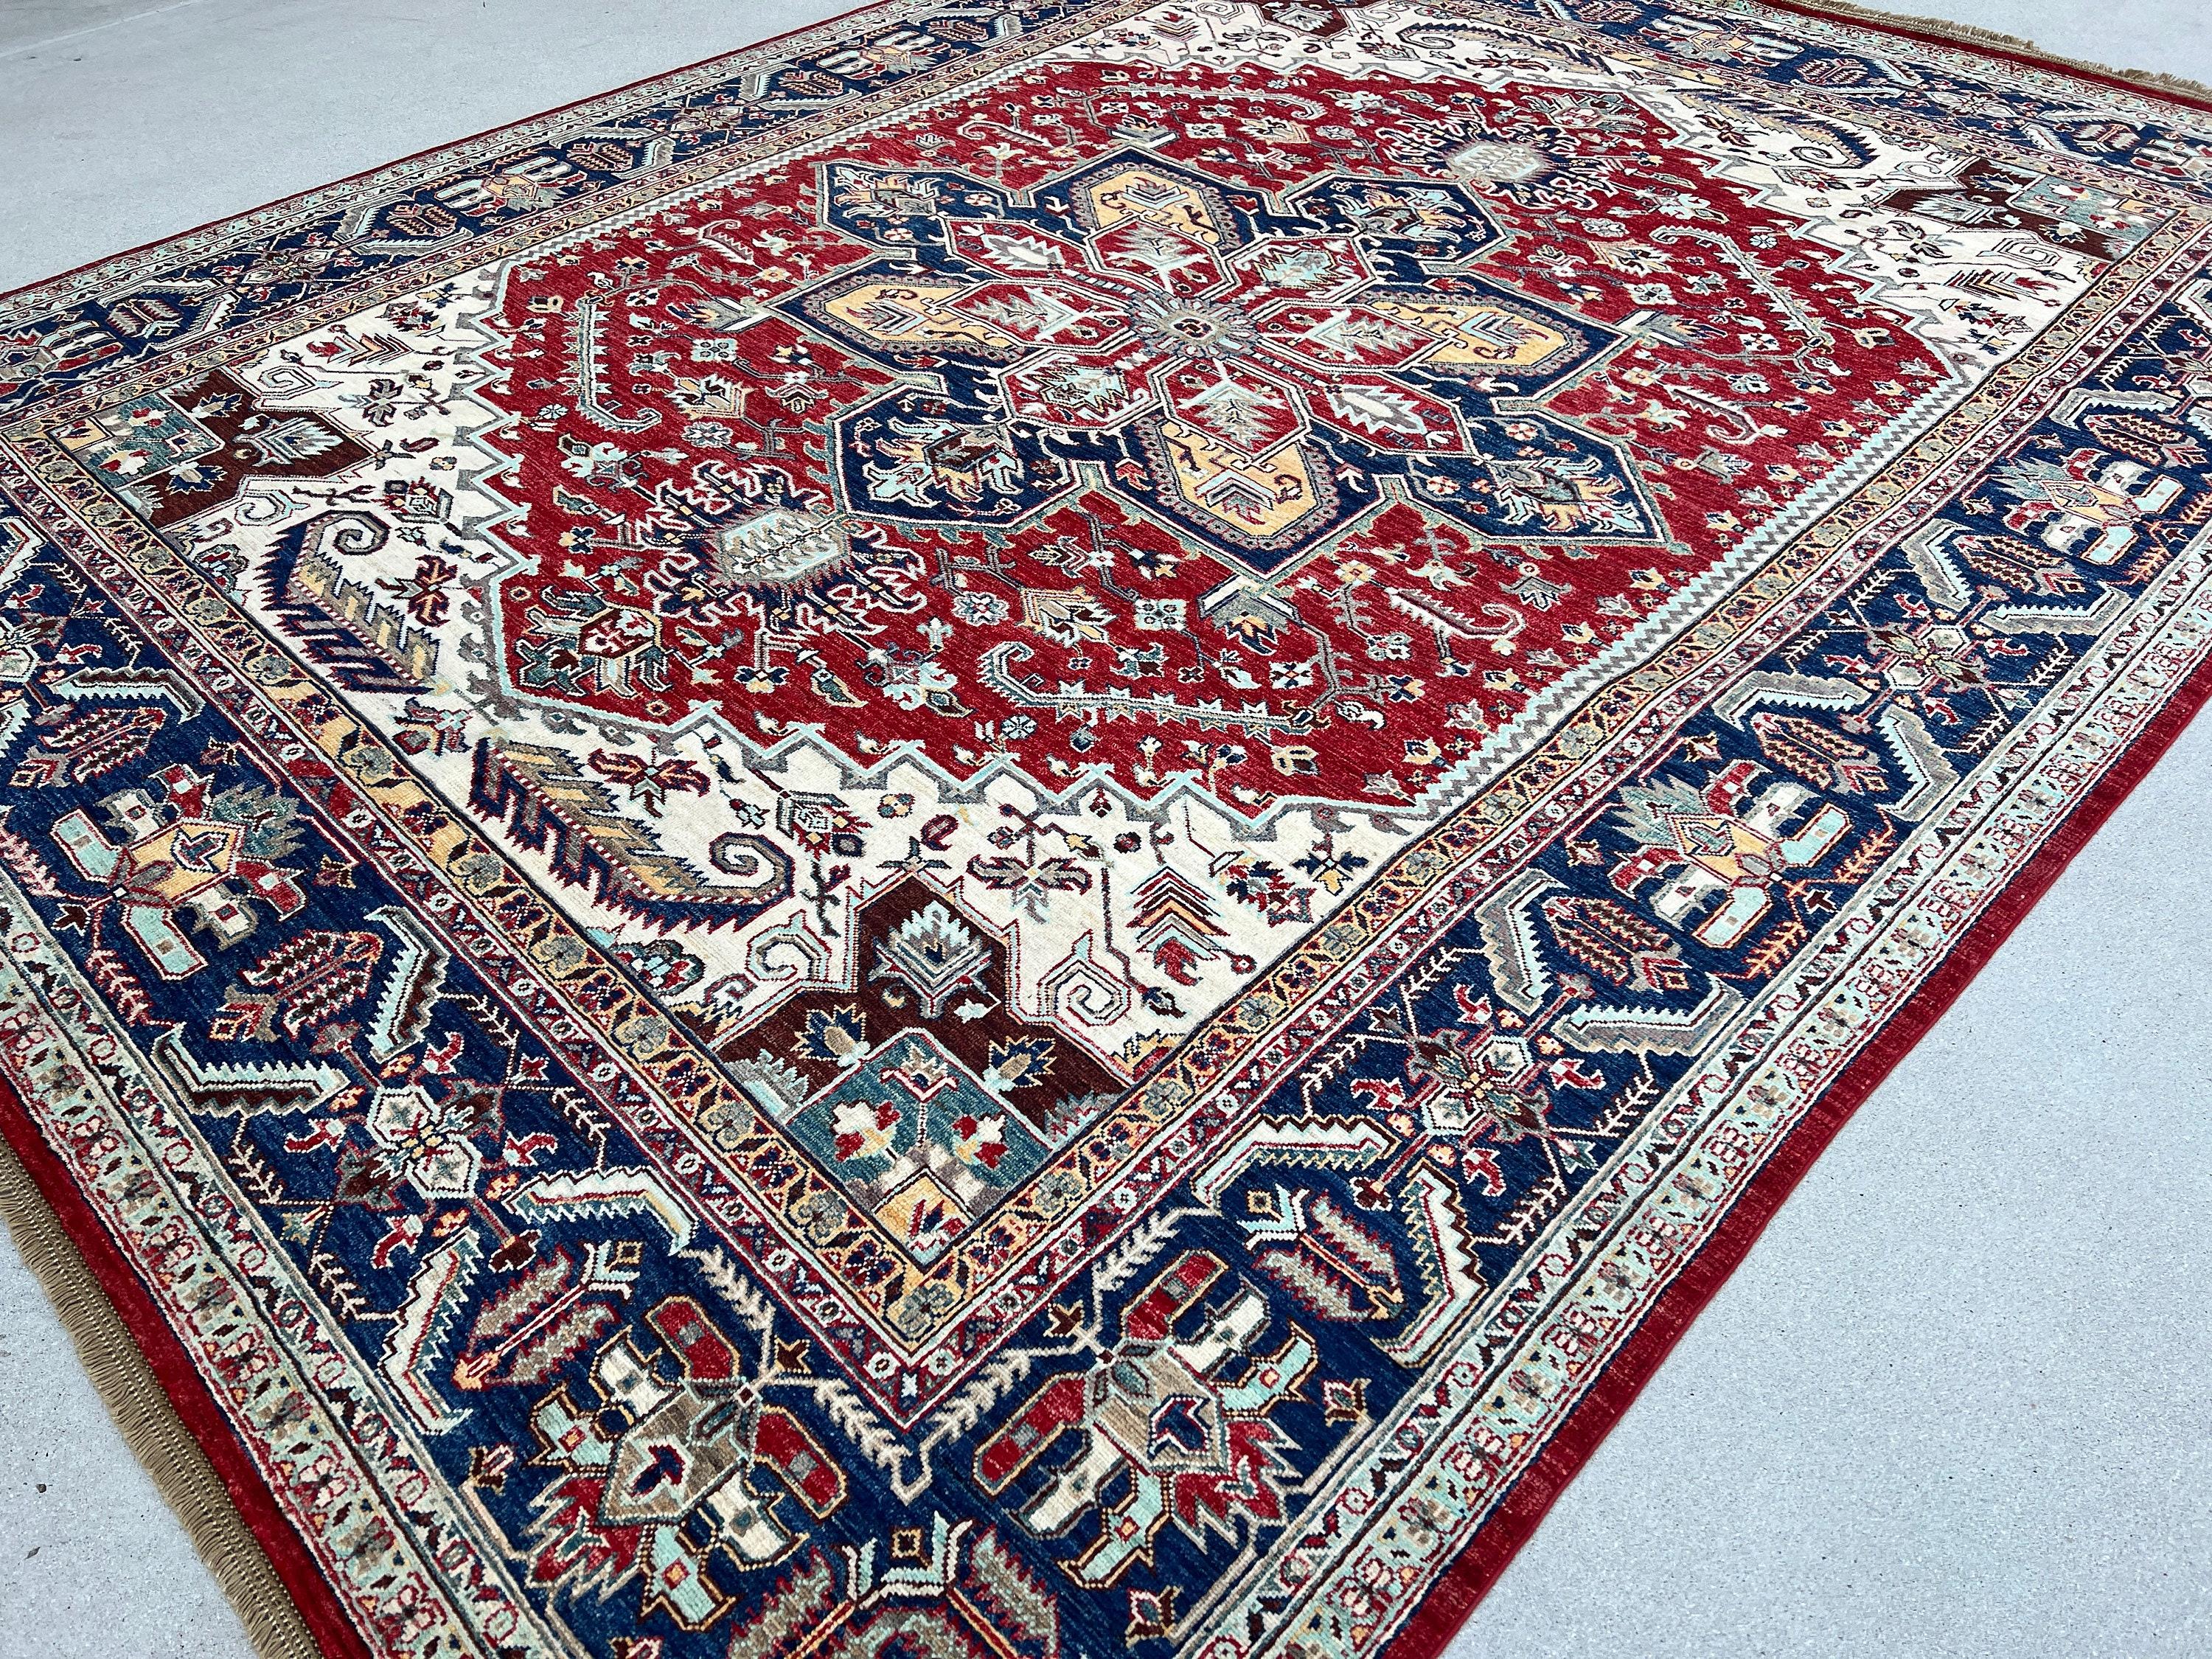 9x11 Hand-Knotted Afghan Rug Premium Hand-Spun Afghan Wool Fair Trade In New Condition For Sale In San Marcos, CA